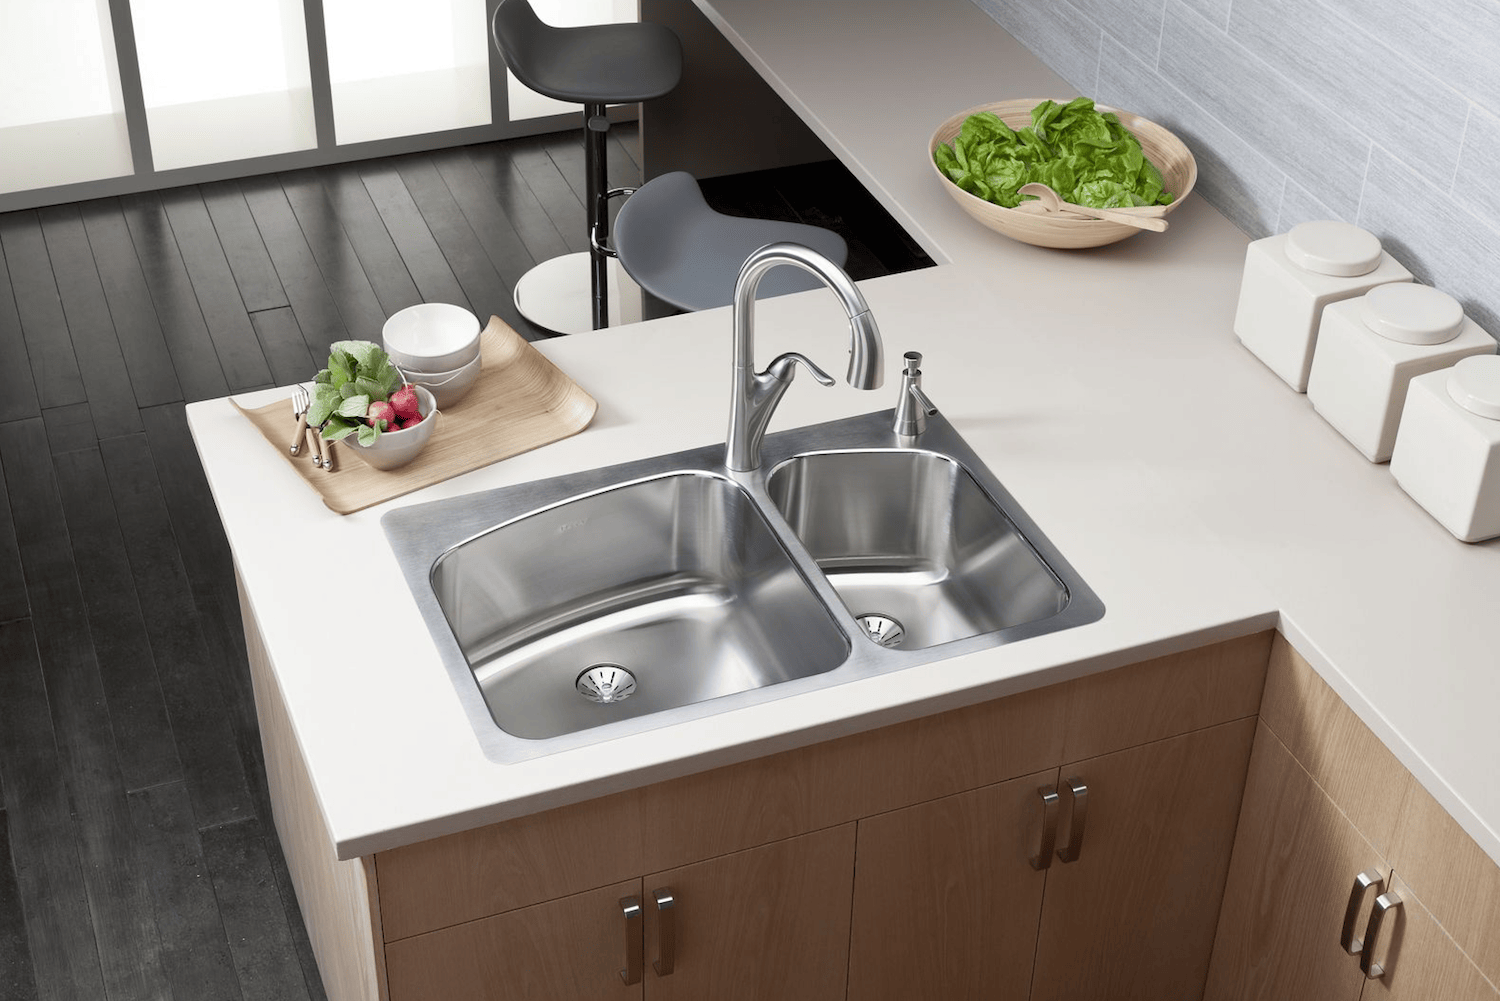 Stainless Steel Sinks: Everything You Need to Know | QualityBath.com Pros And Cons Of Stainless Steel Sinks